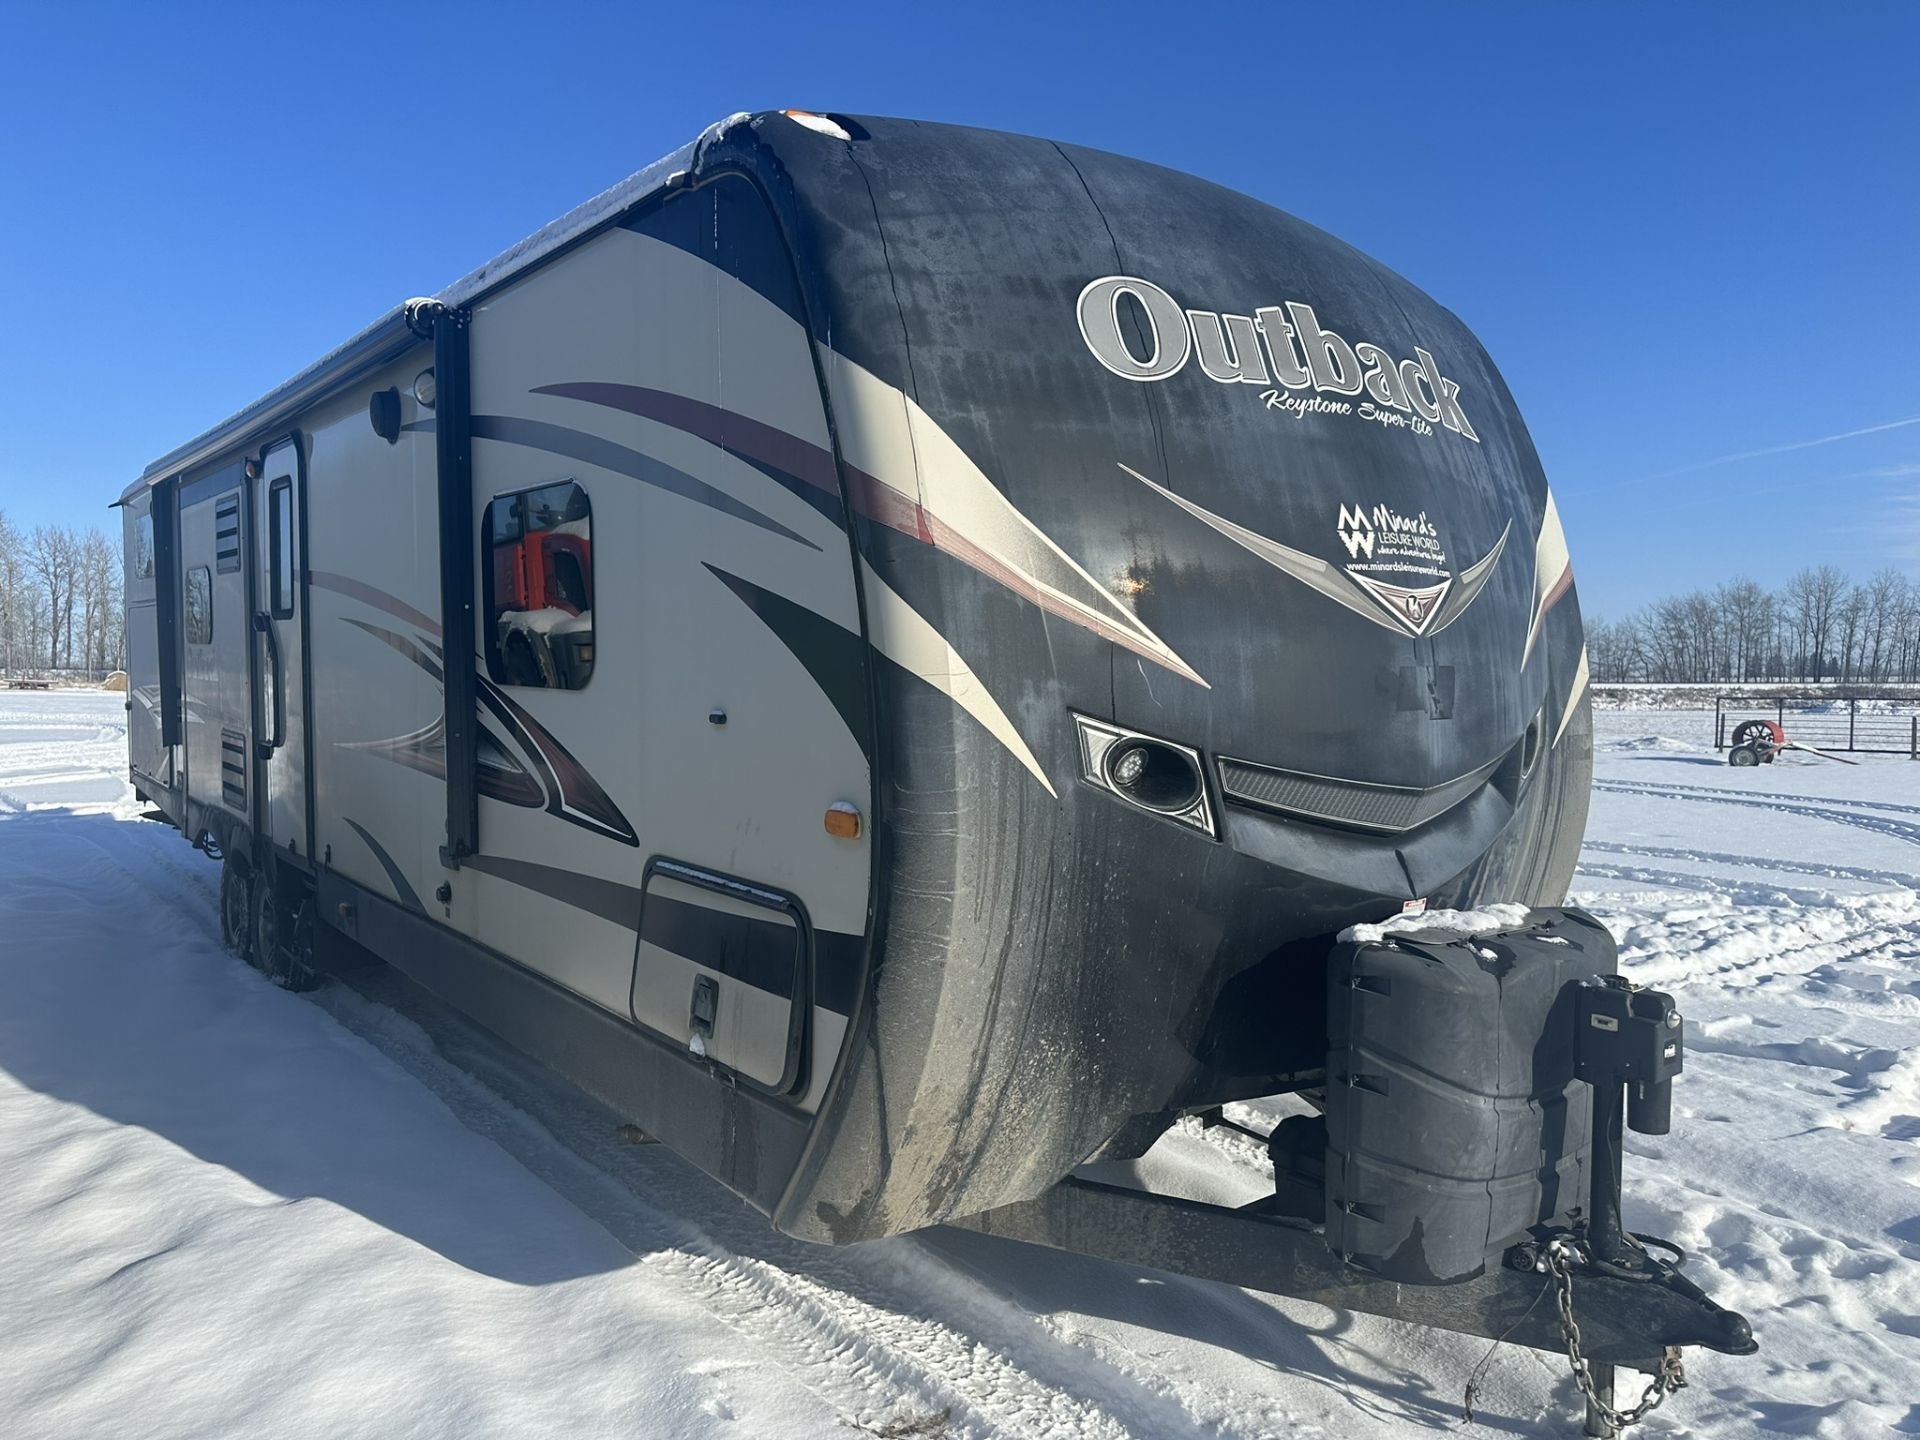 2014 OUTBACK KEYSTONE SUPER-LITE 33 FT HOLIDAY TRAILER, DOUBLE SLIDE, POWER AWNING, OUTDOOR KITCHEN, - Image 12 of 15